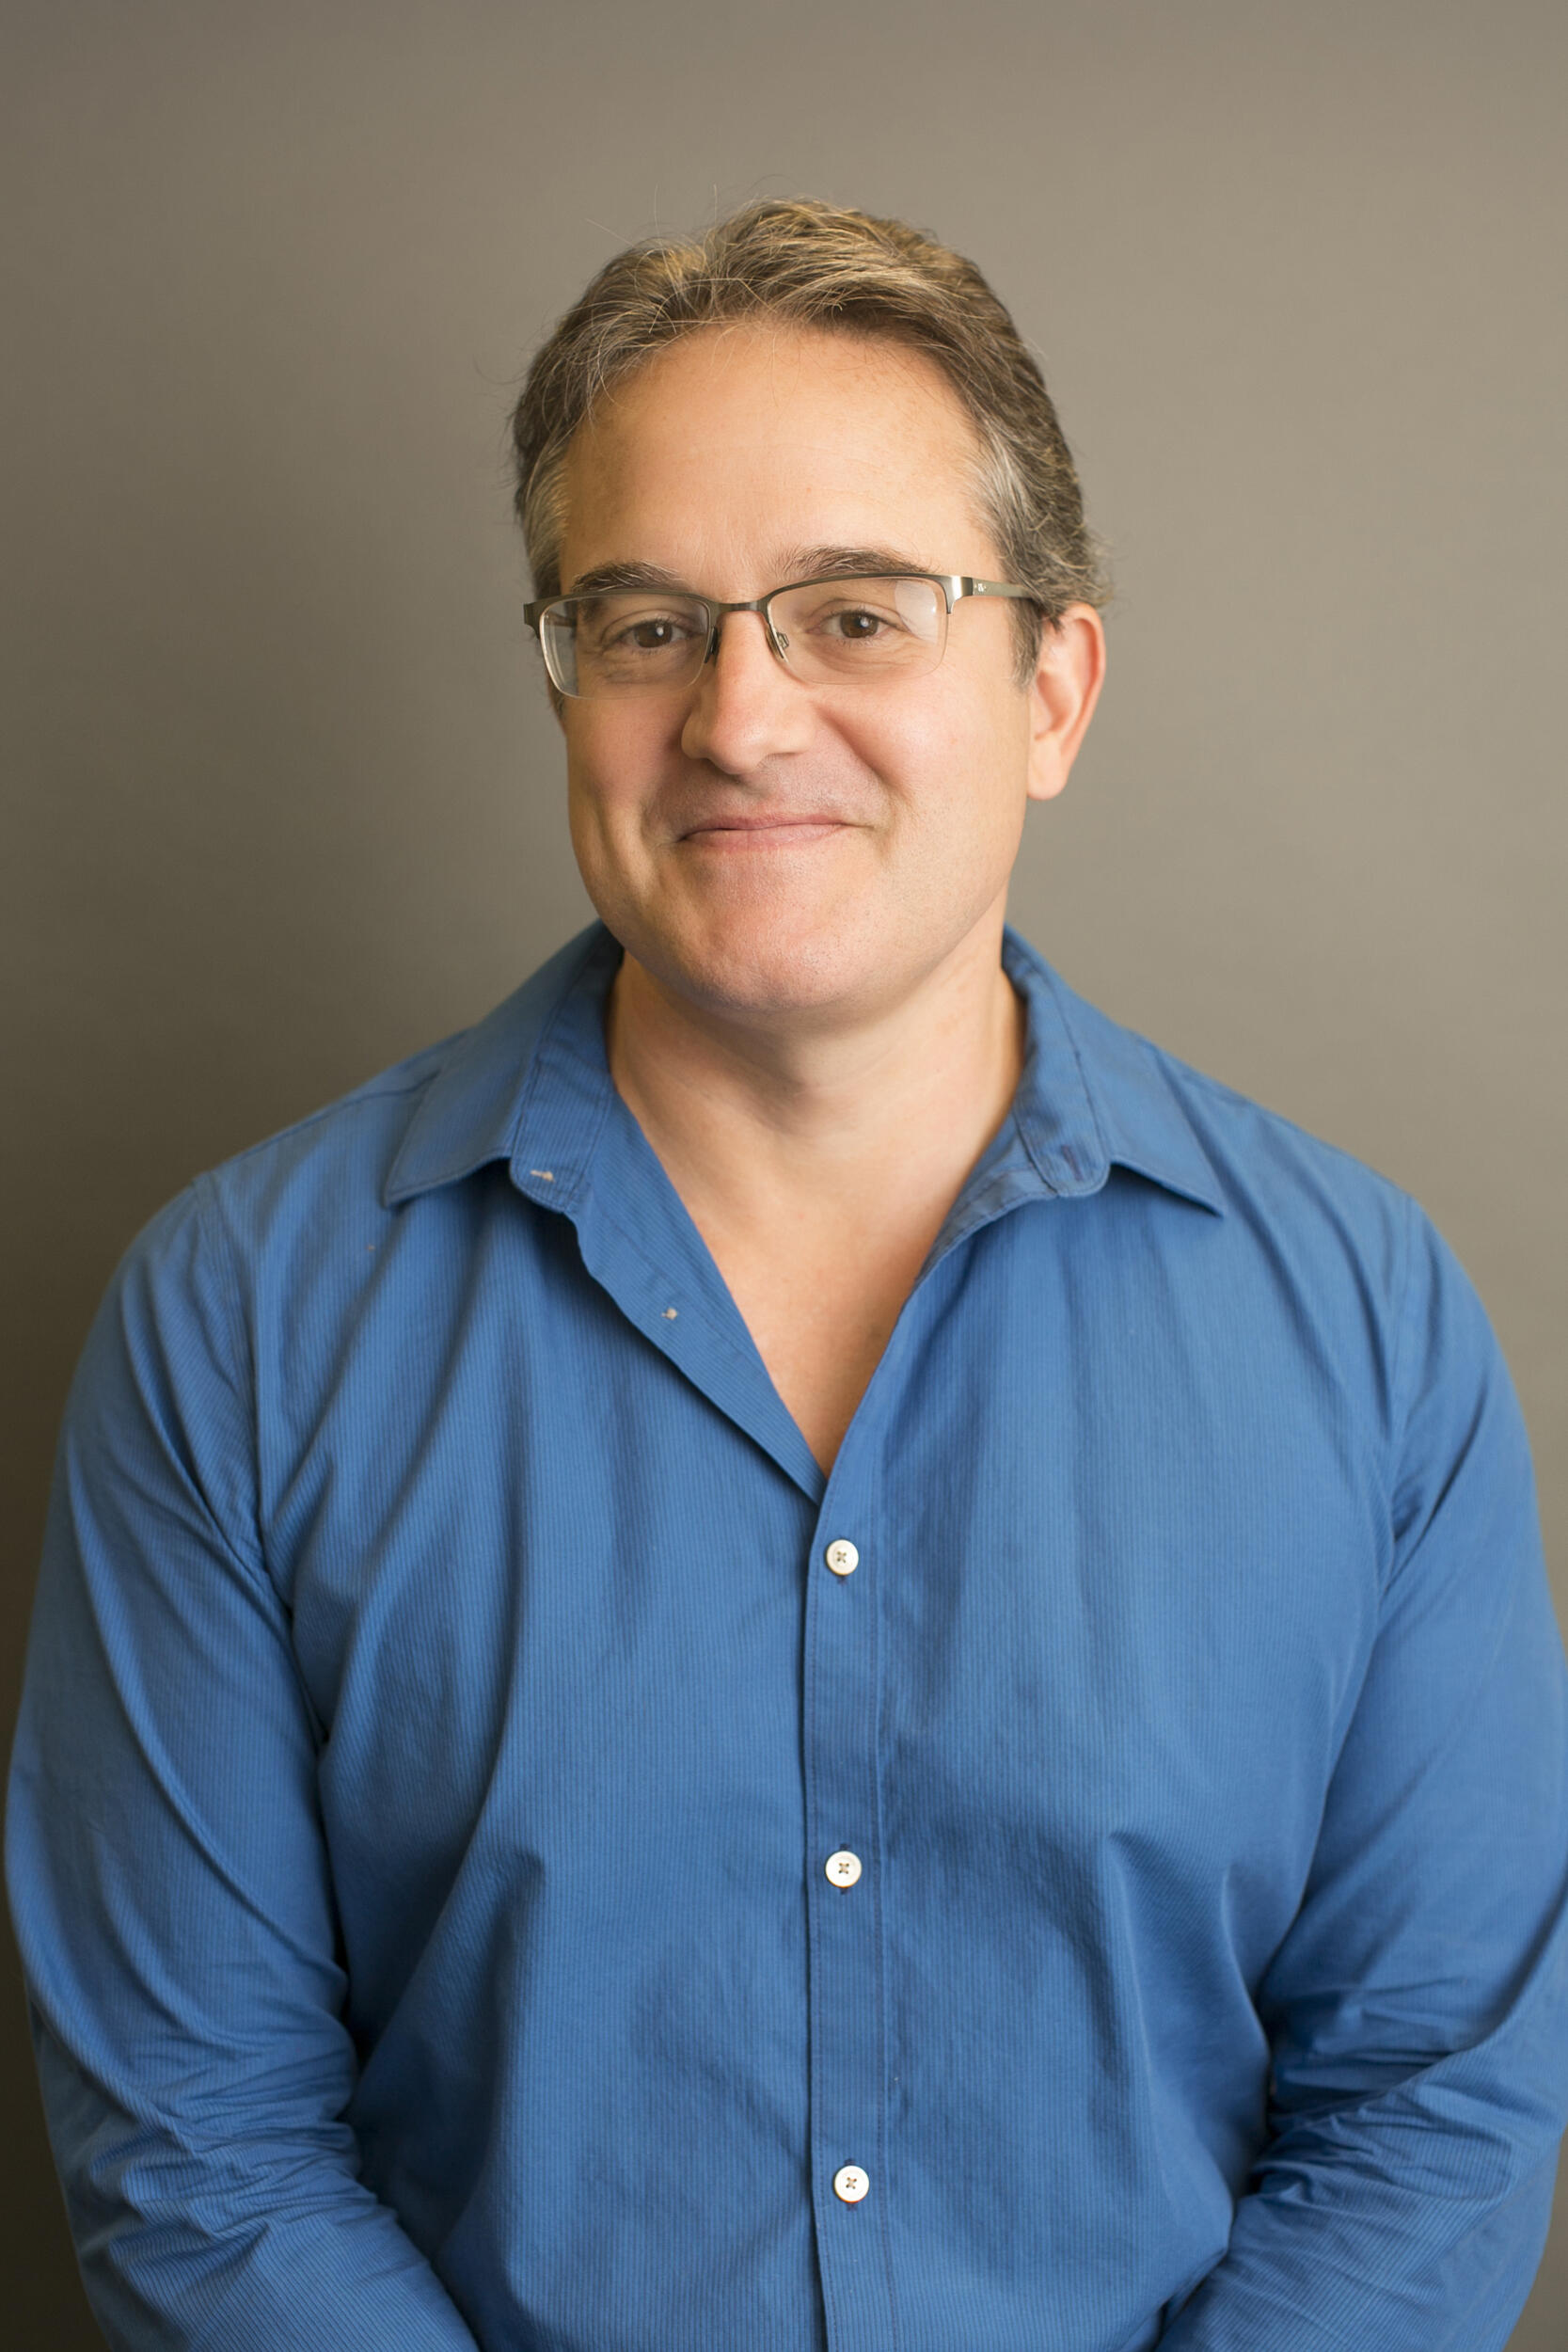 A photo of a man wearing a blue button down shirt and black glasses 